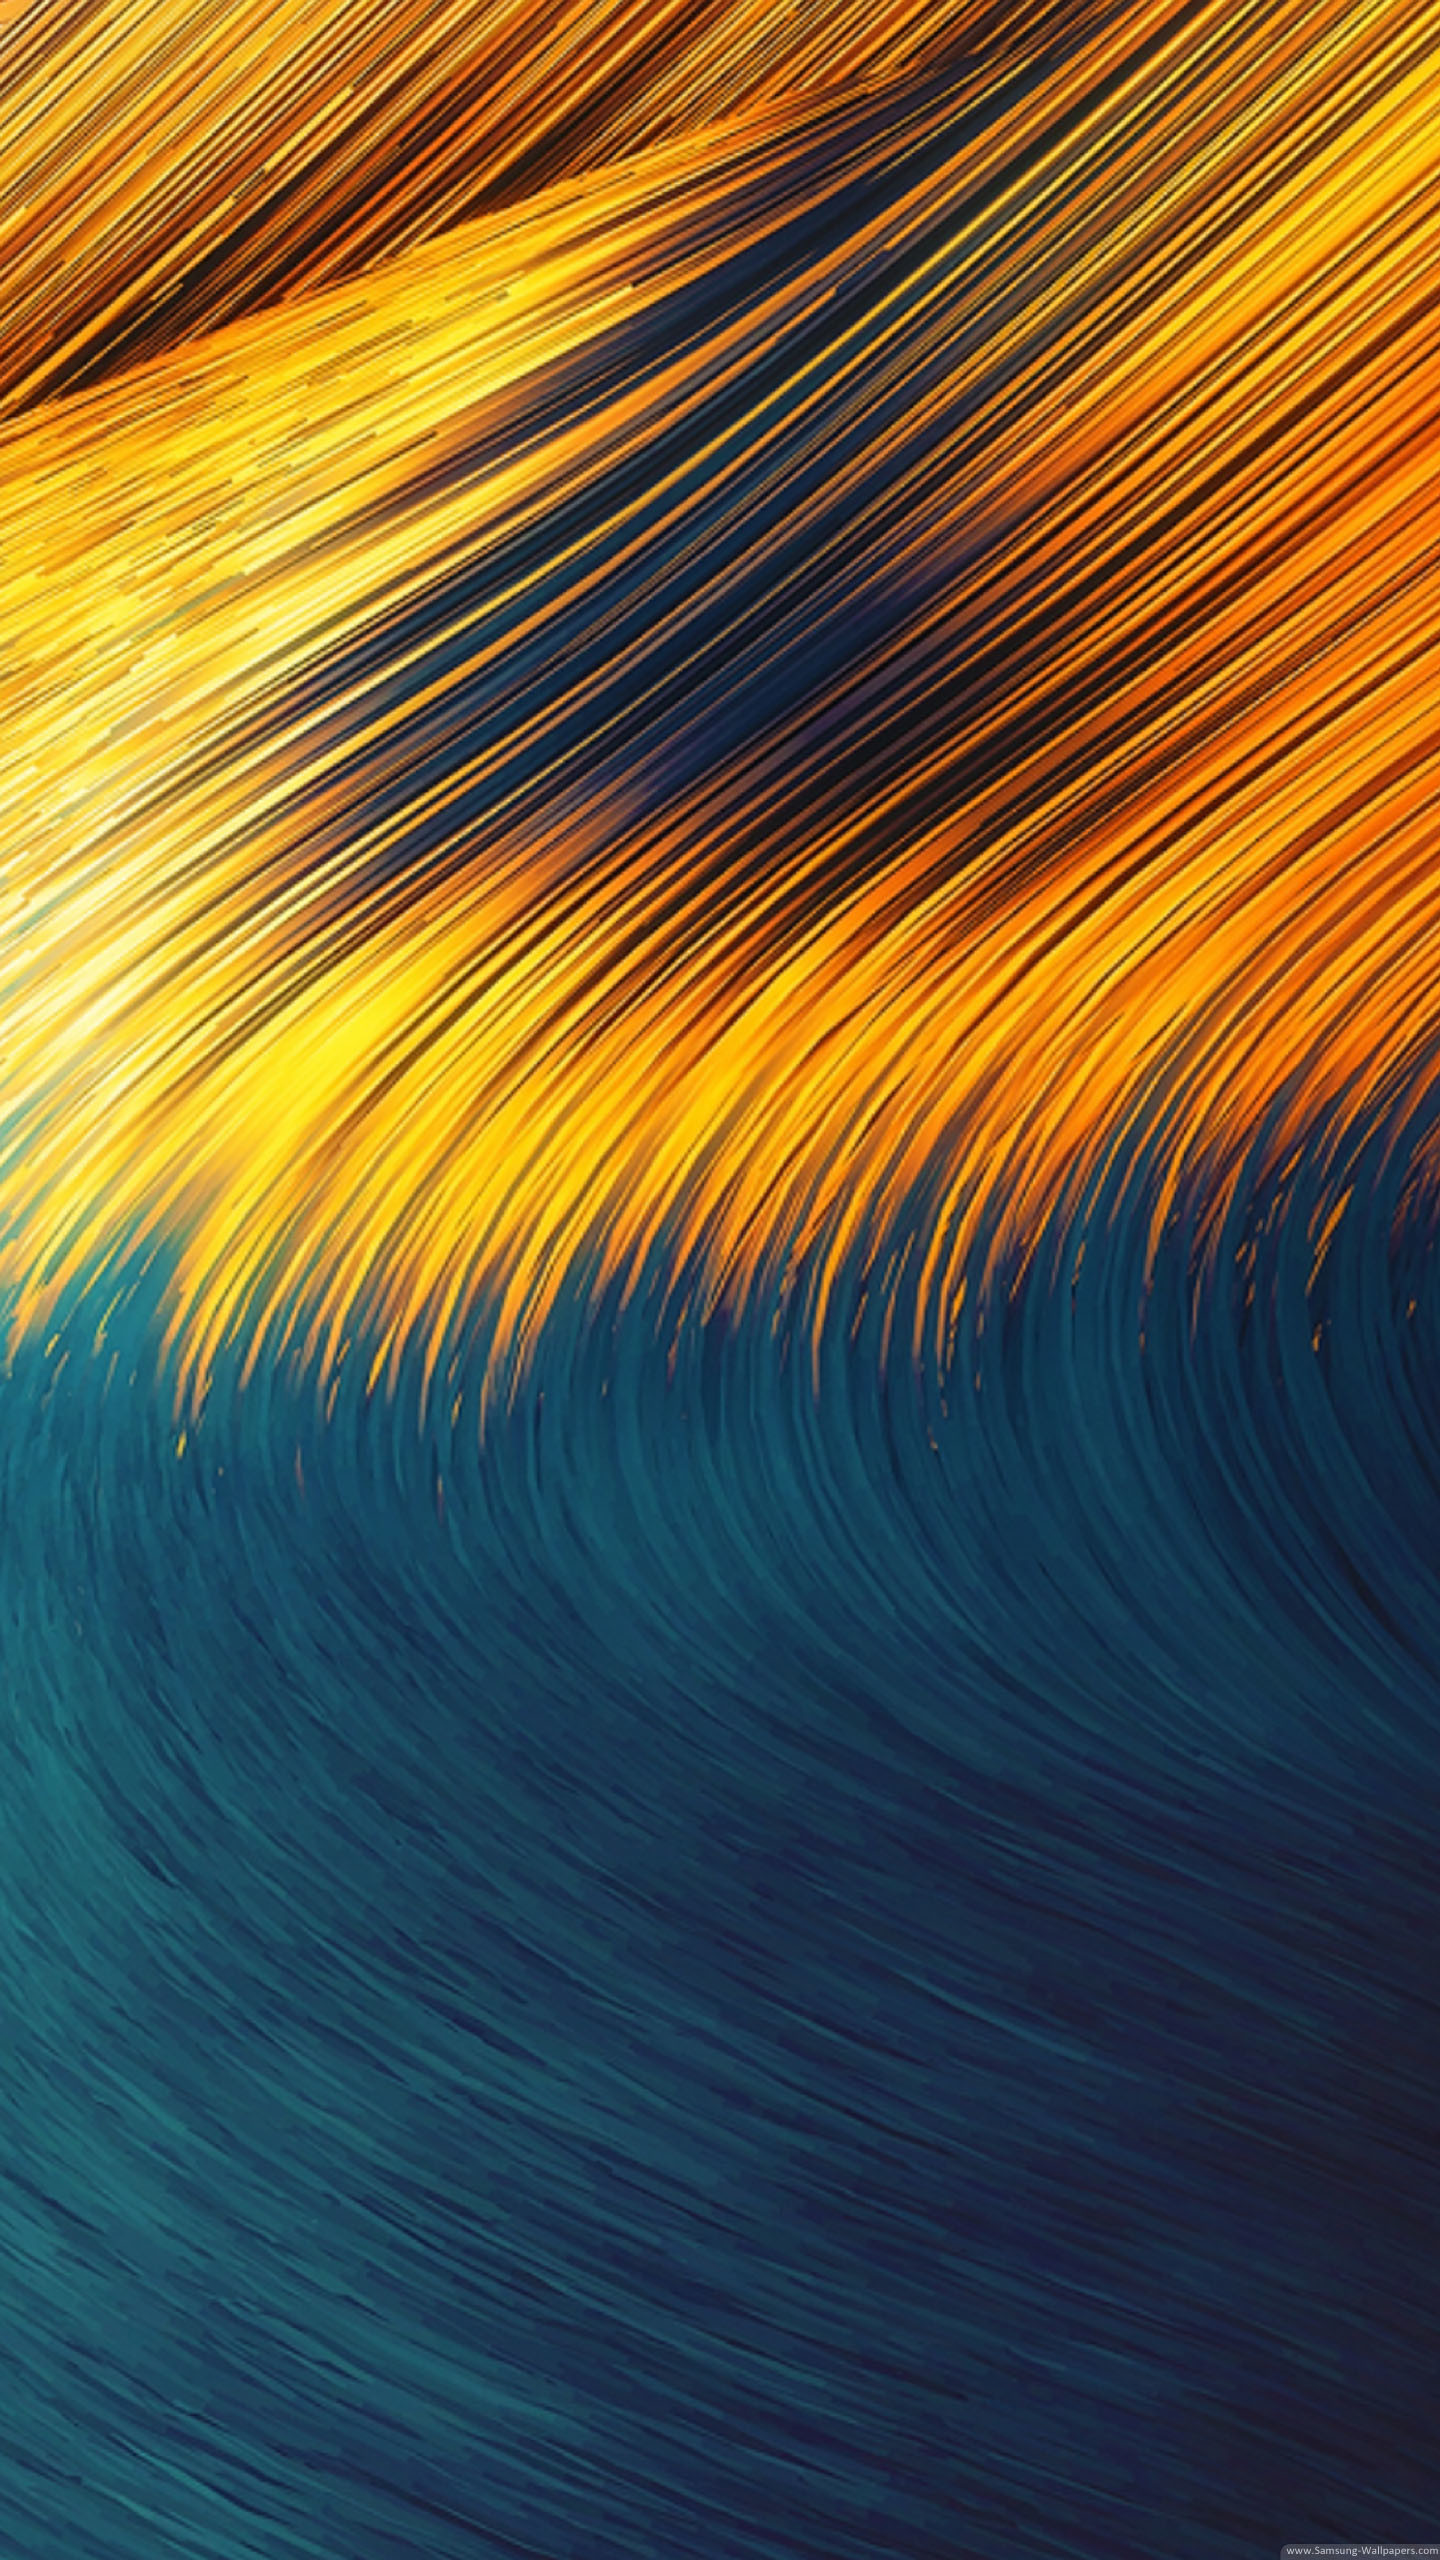 Galaxy S6 Gold Wallpapers